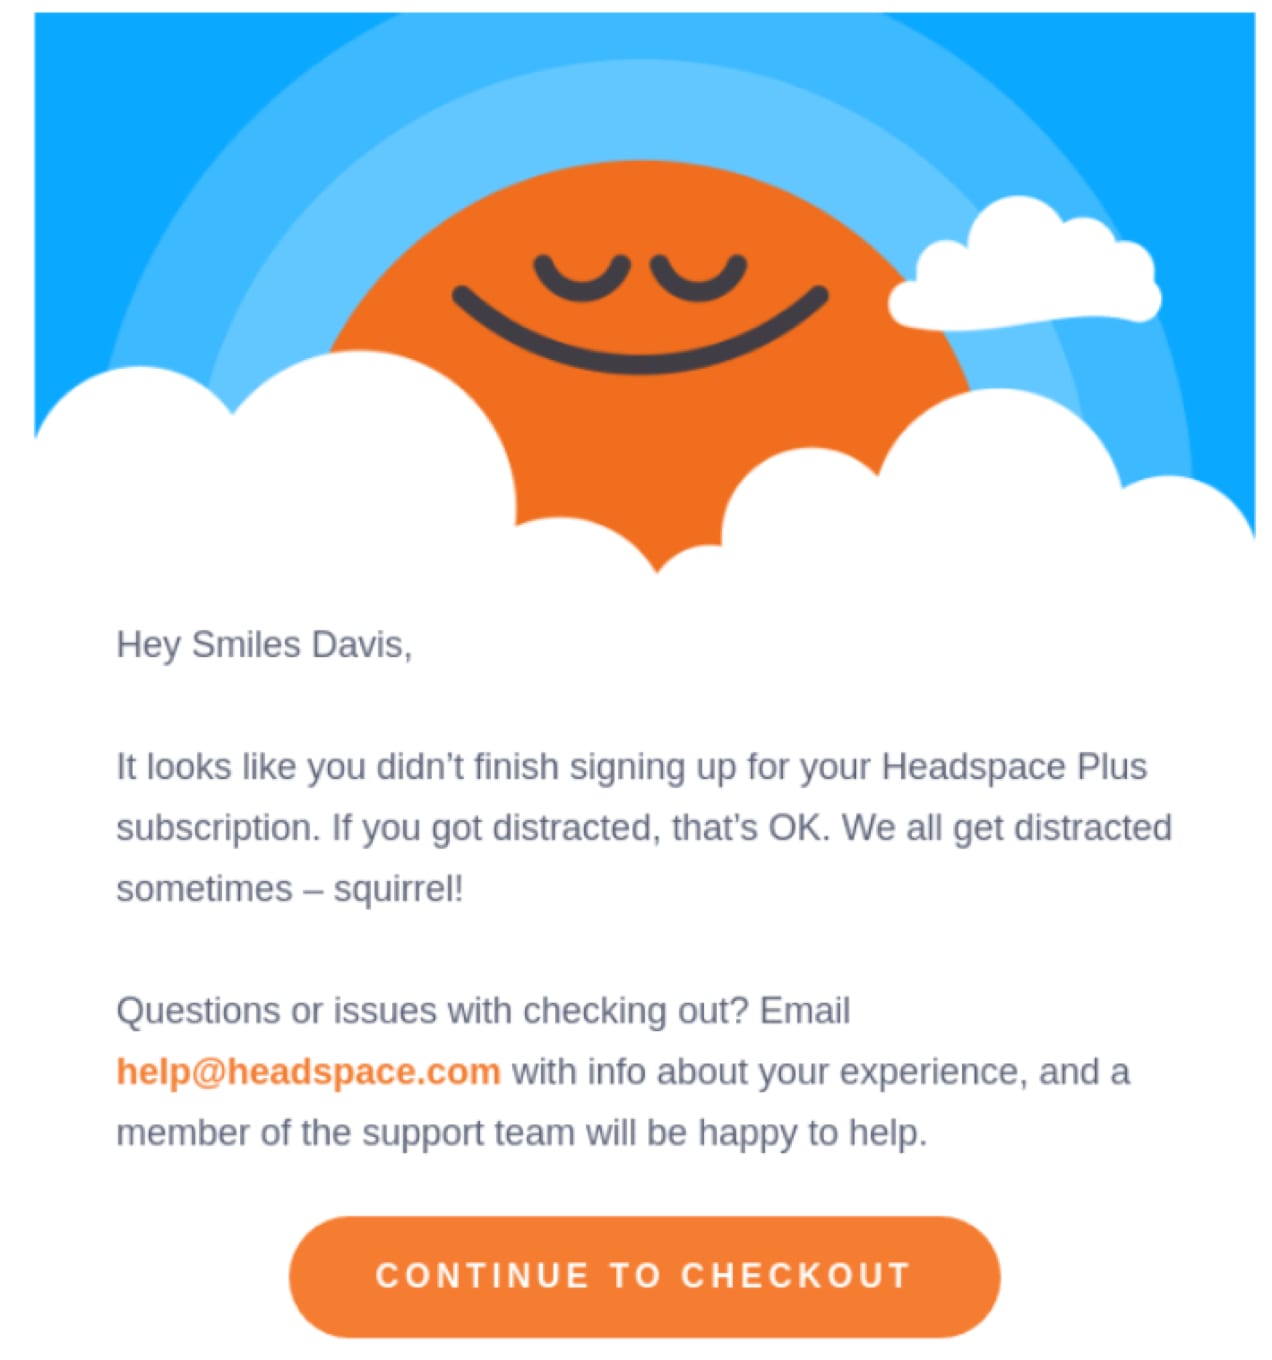 example email in blue and orange